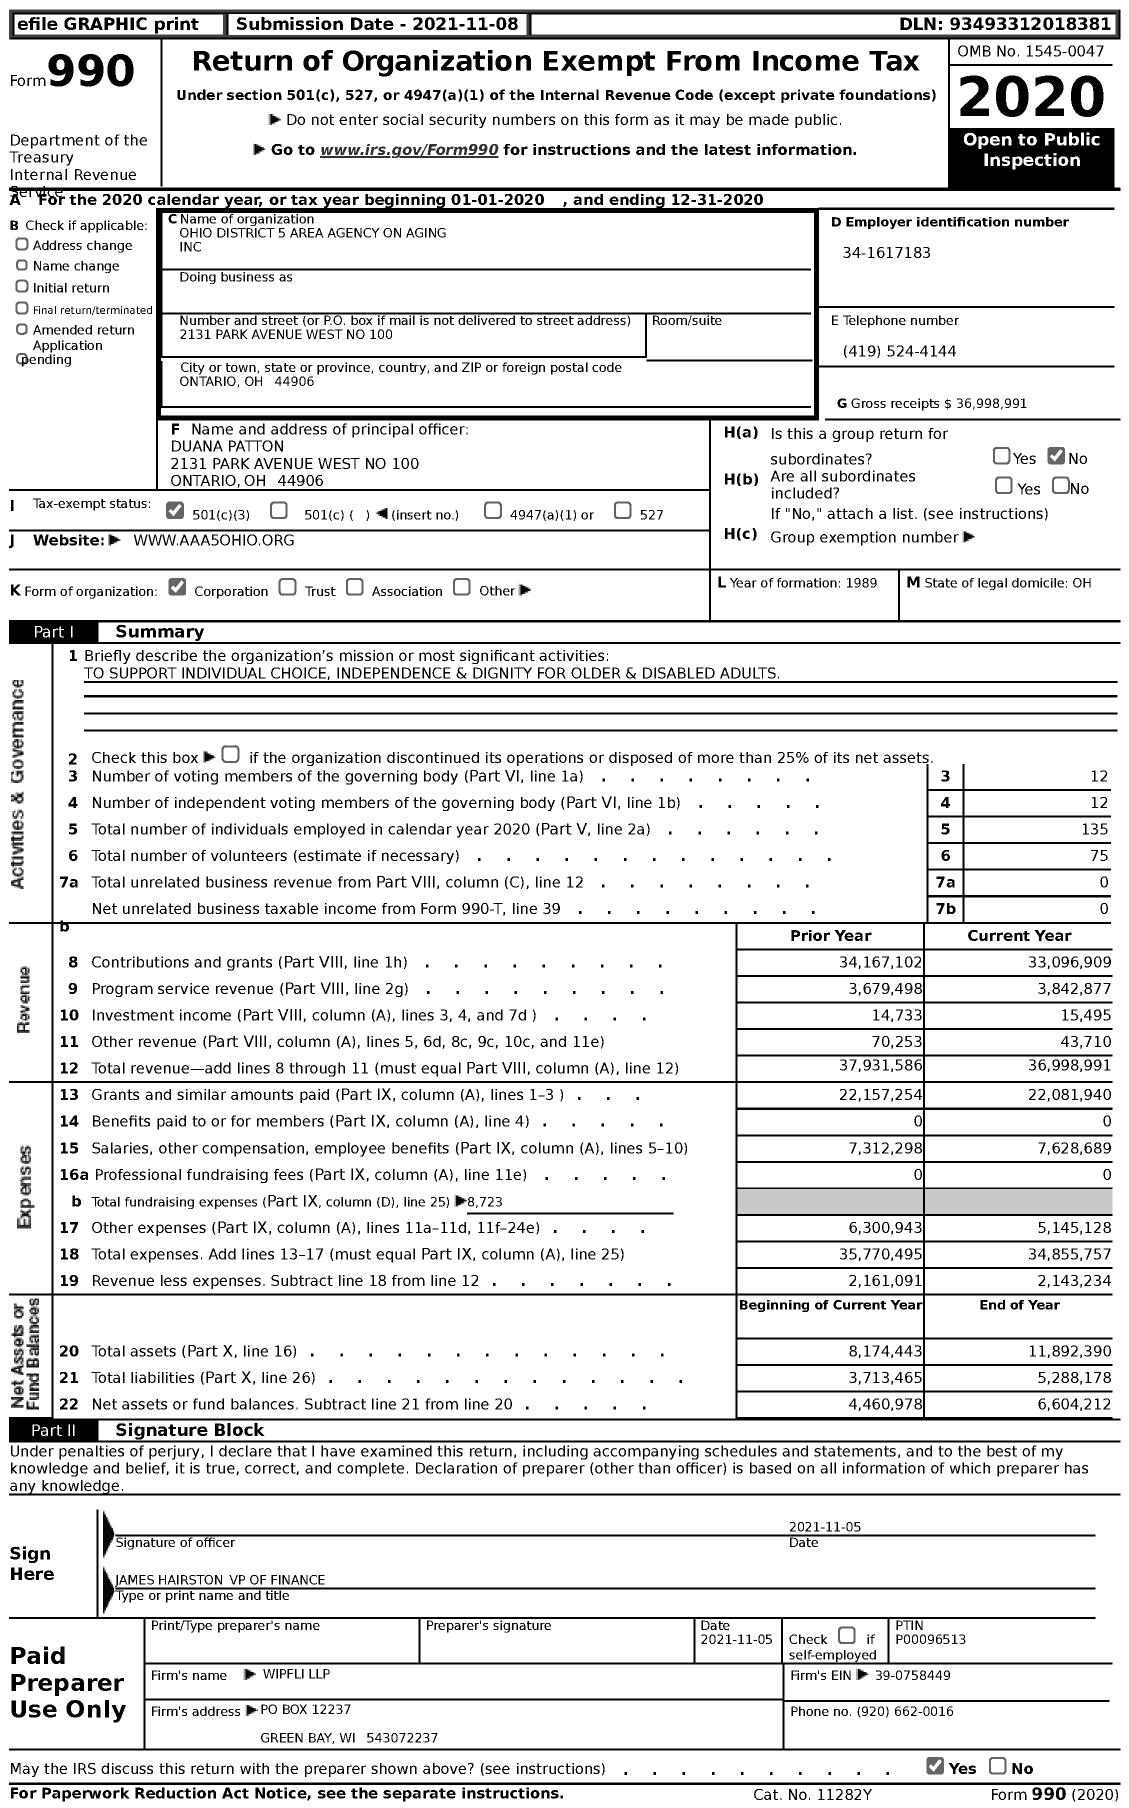 Image of first page of 2020 Form 990 for Ohio District 5 Area Agency on Aging